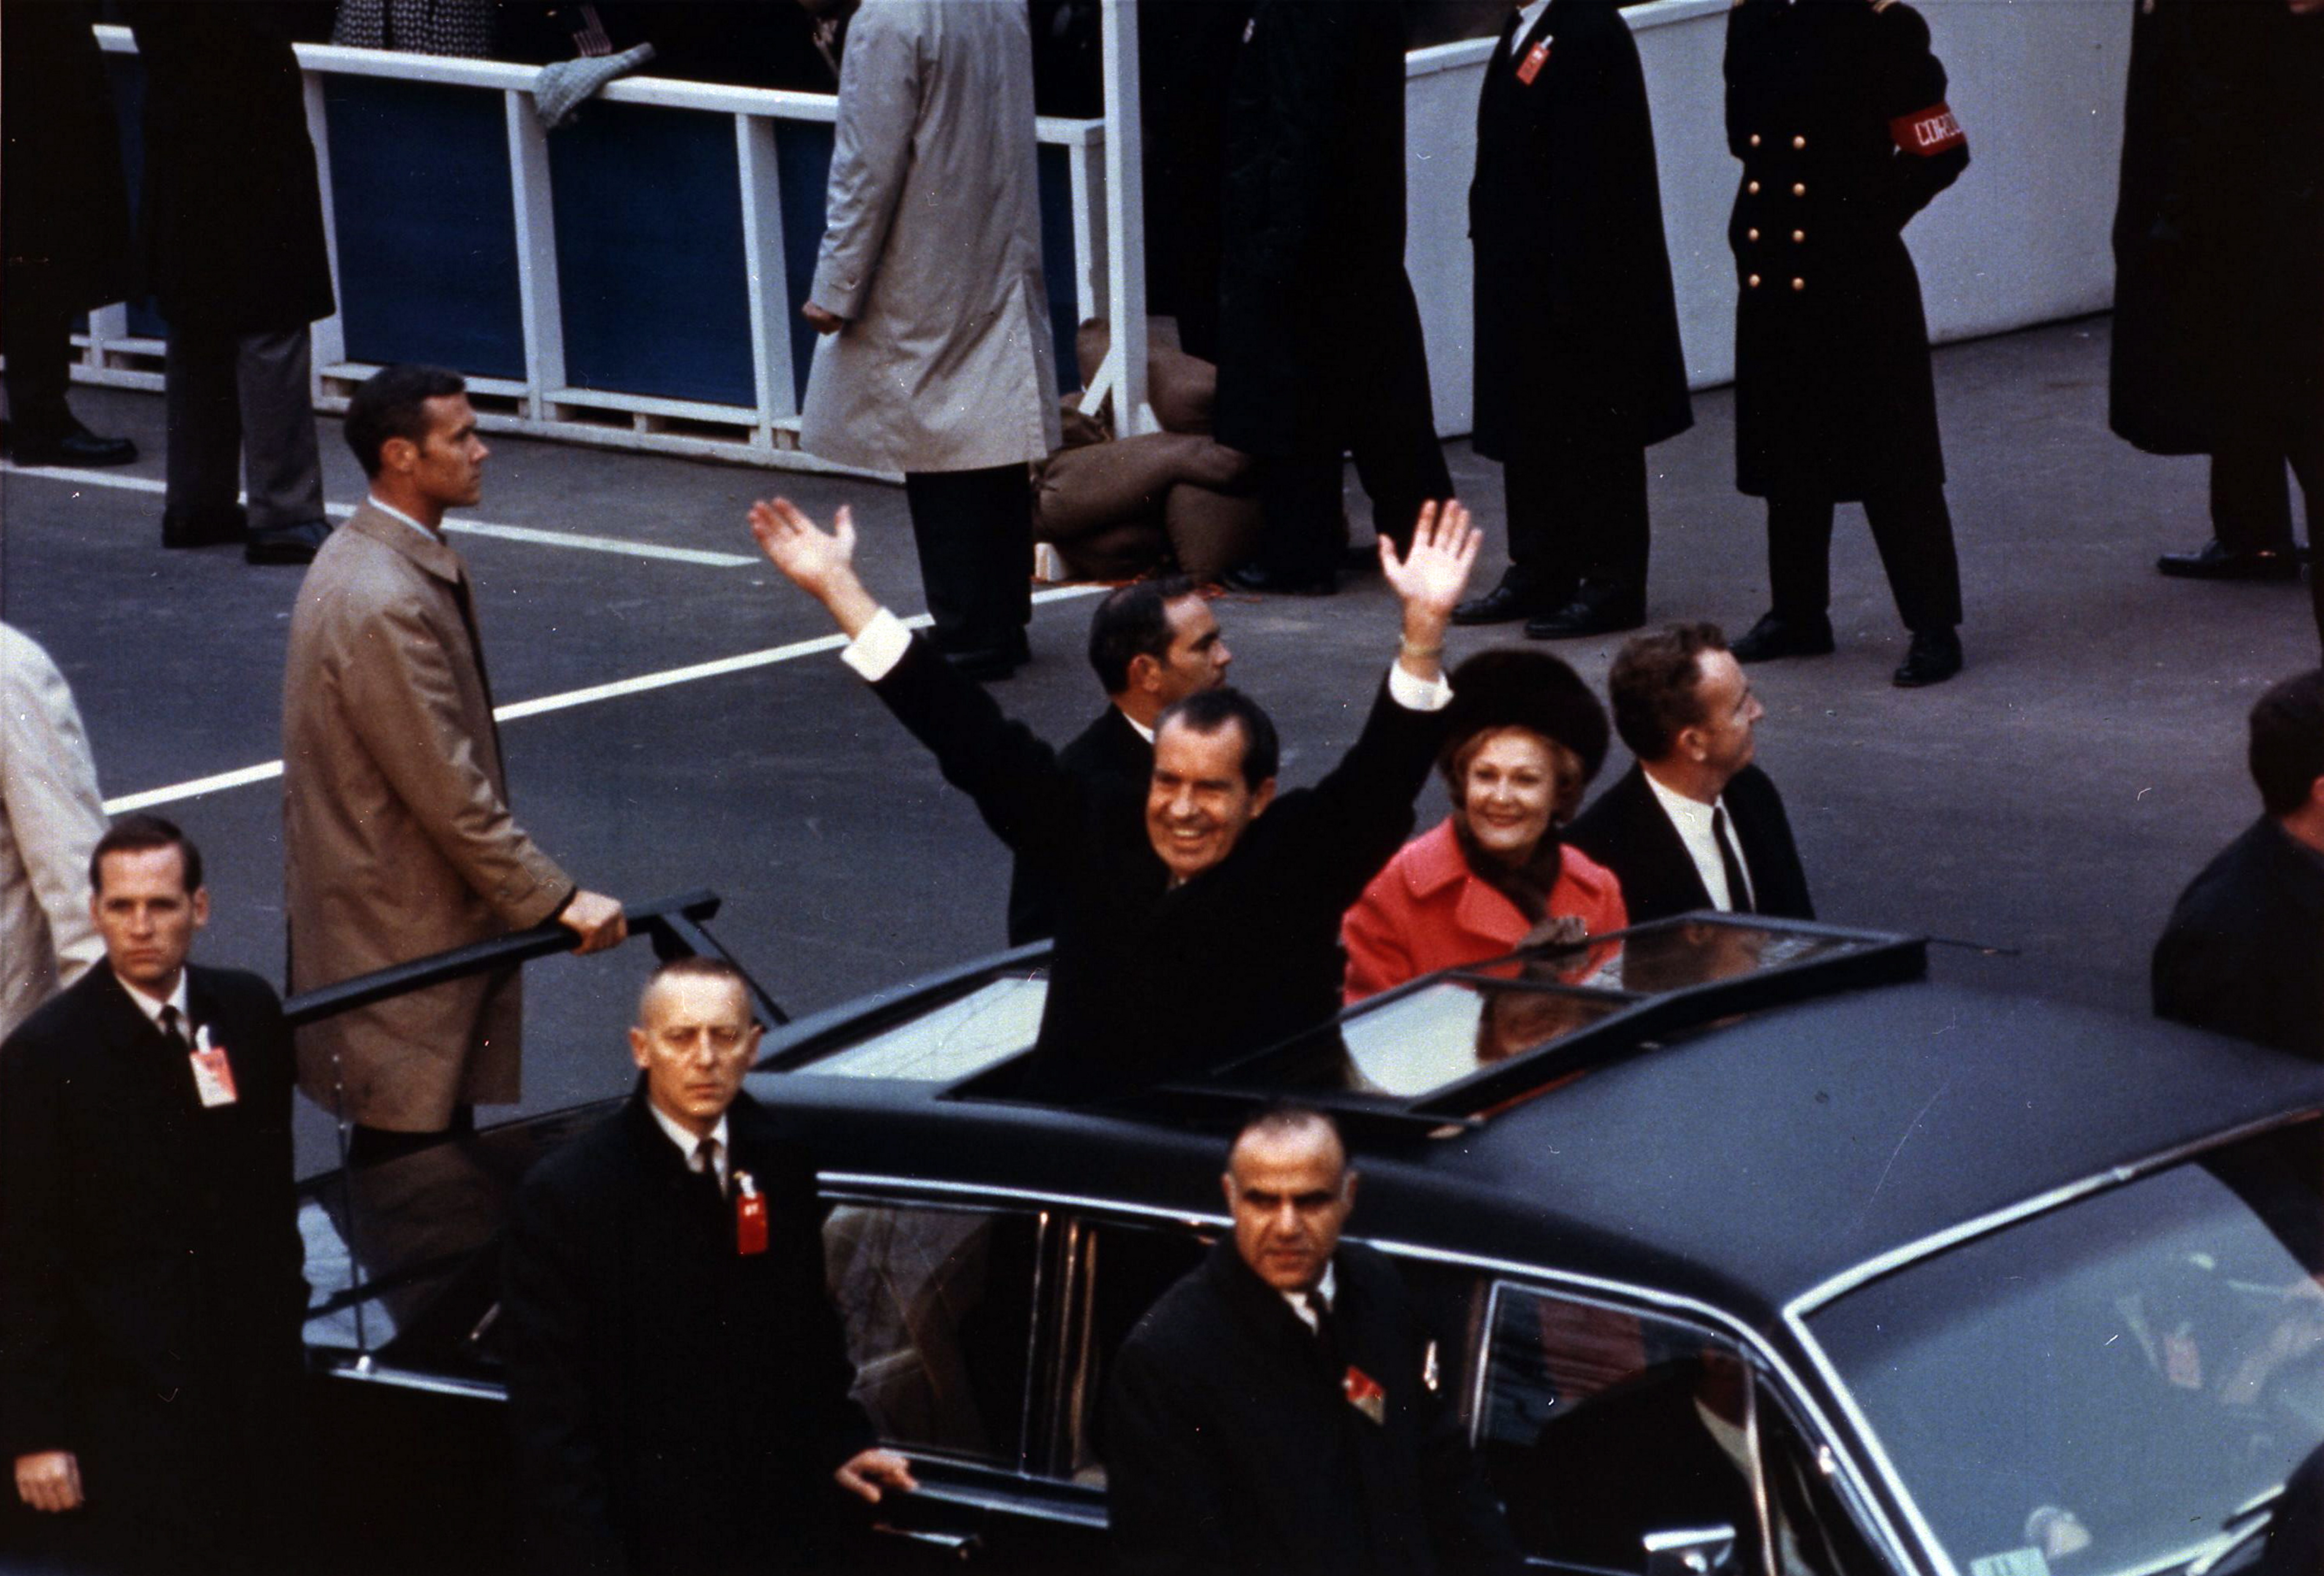 Richard Nixon being inaugurated as the 37th President